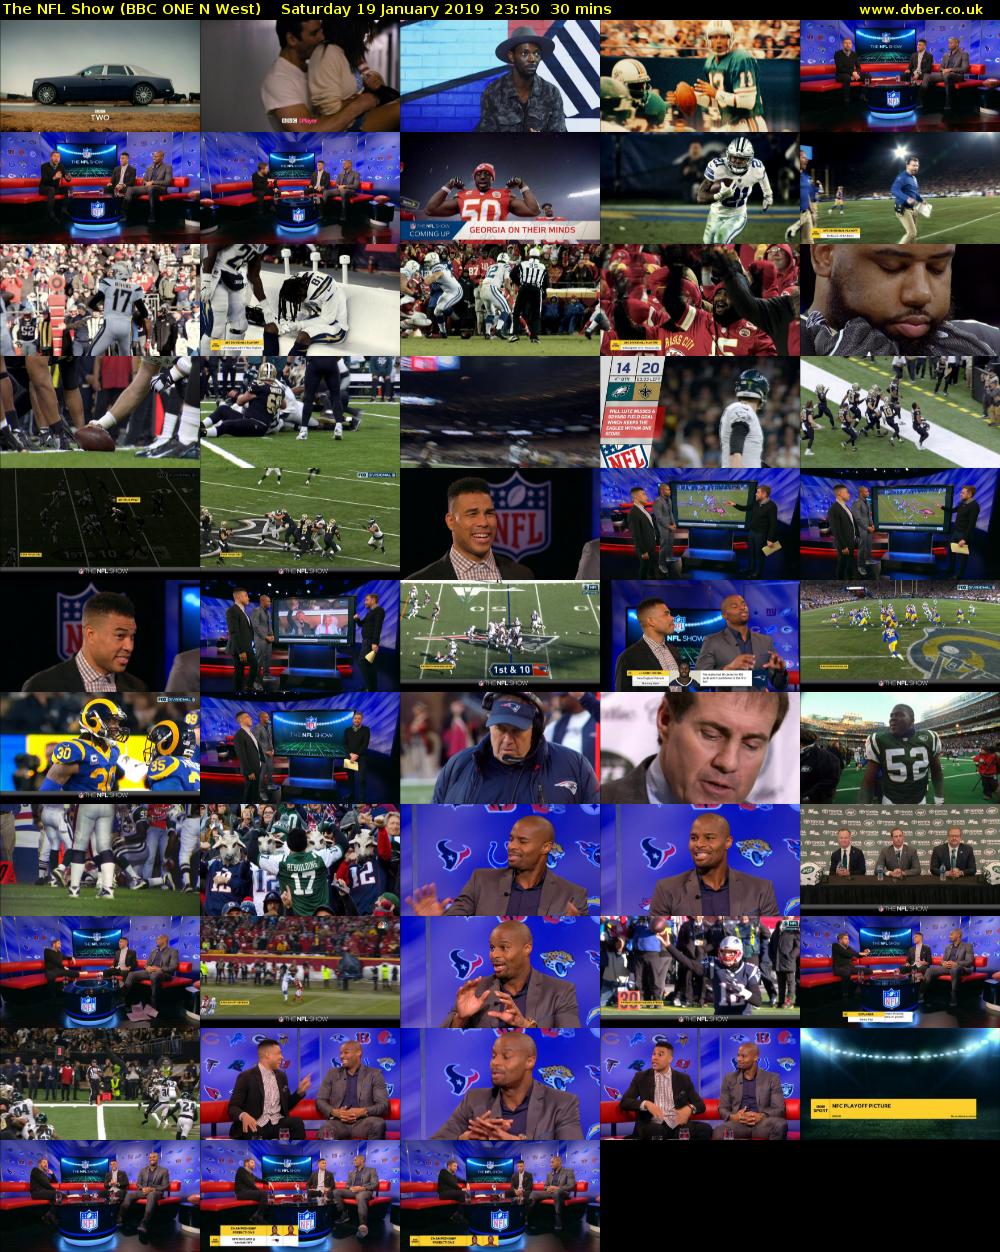 The NFL Show (BBC ONE N West) Saturday 19 January 2019 23:50 - 00:20